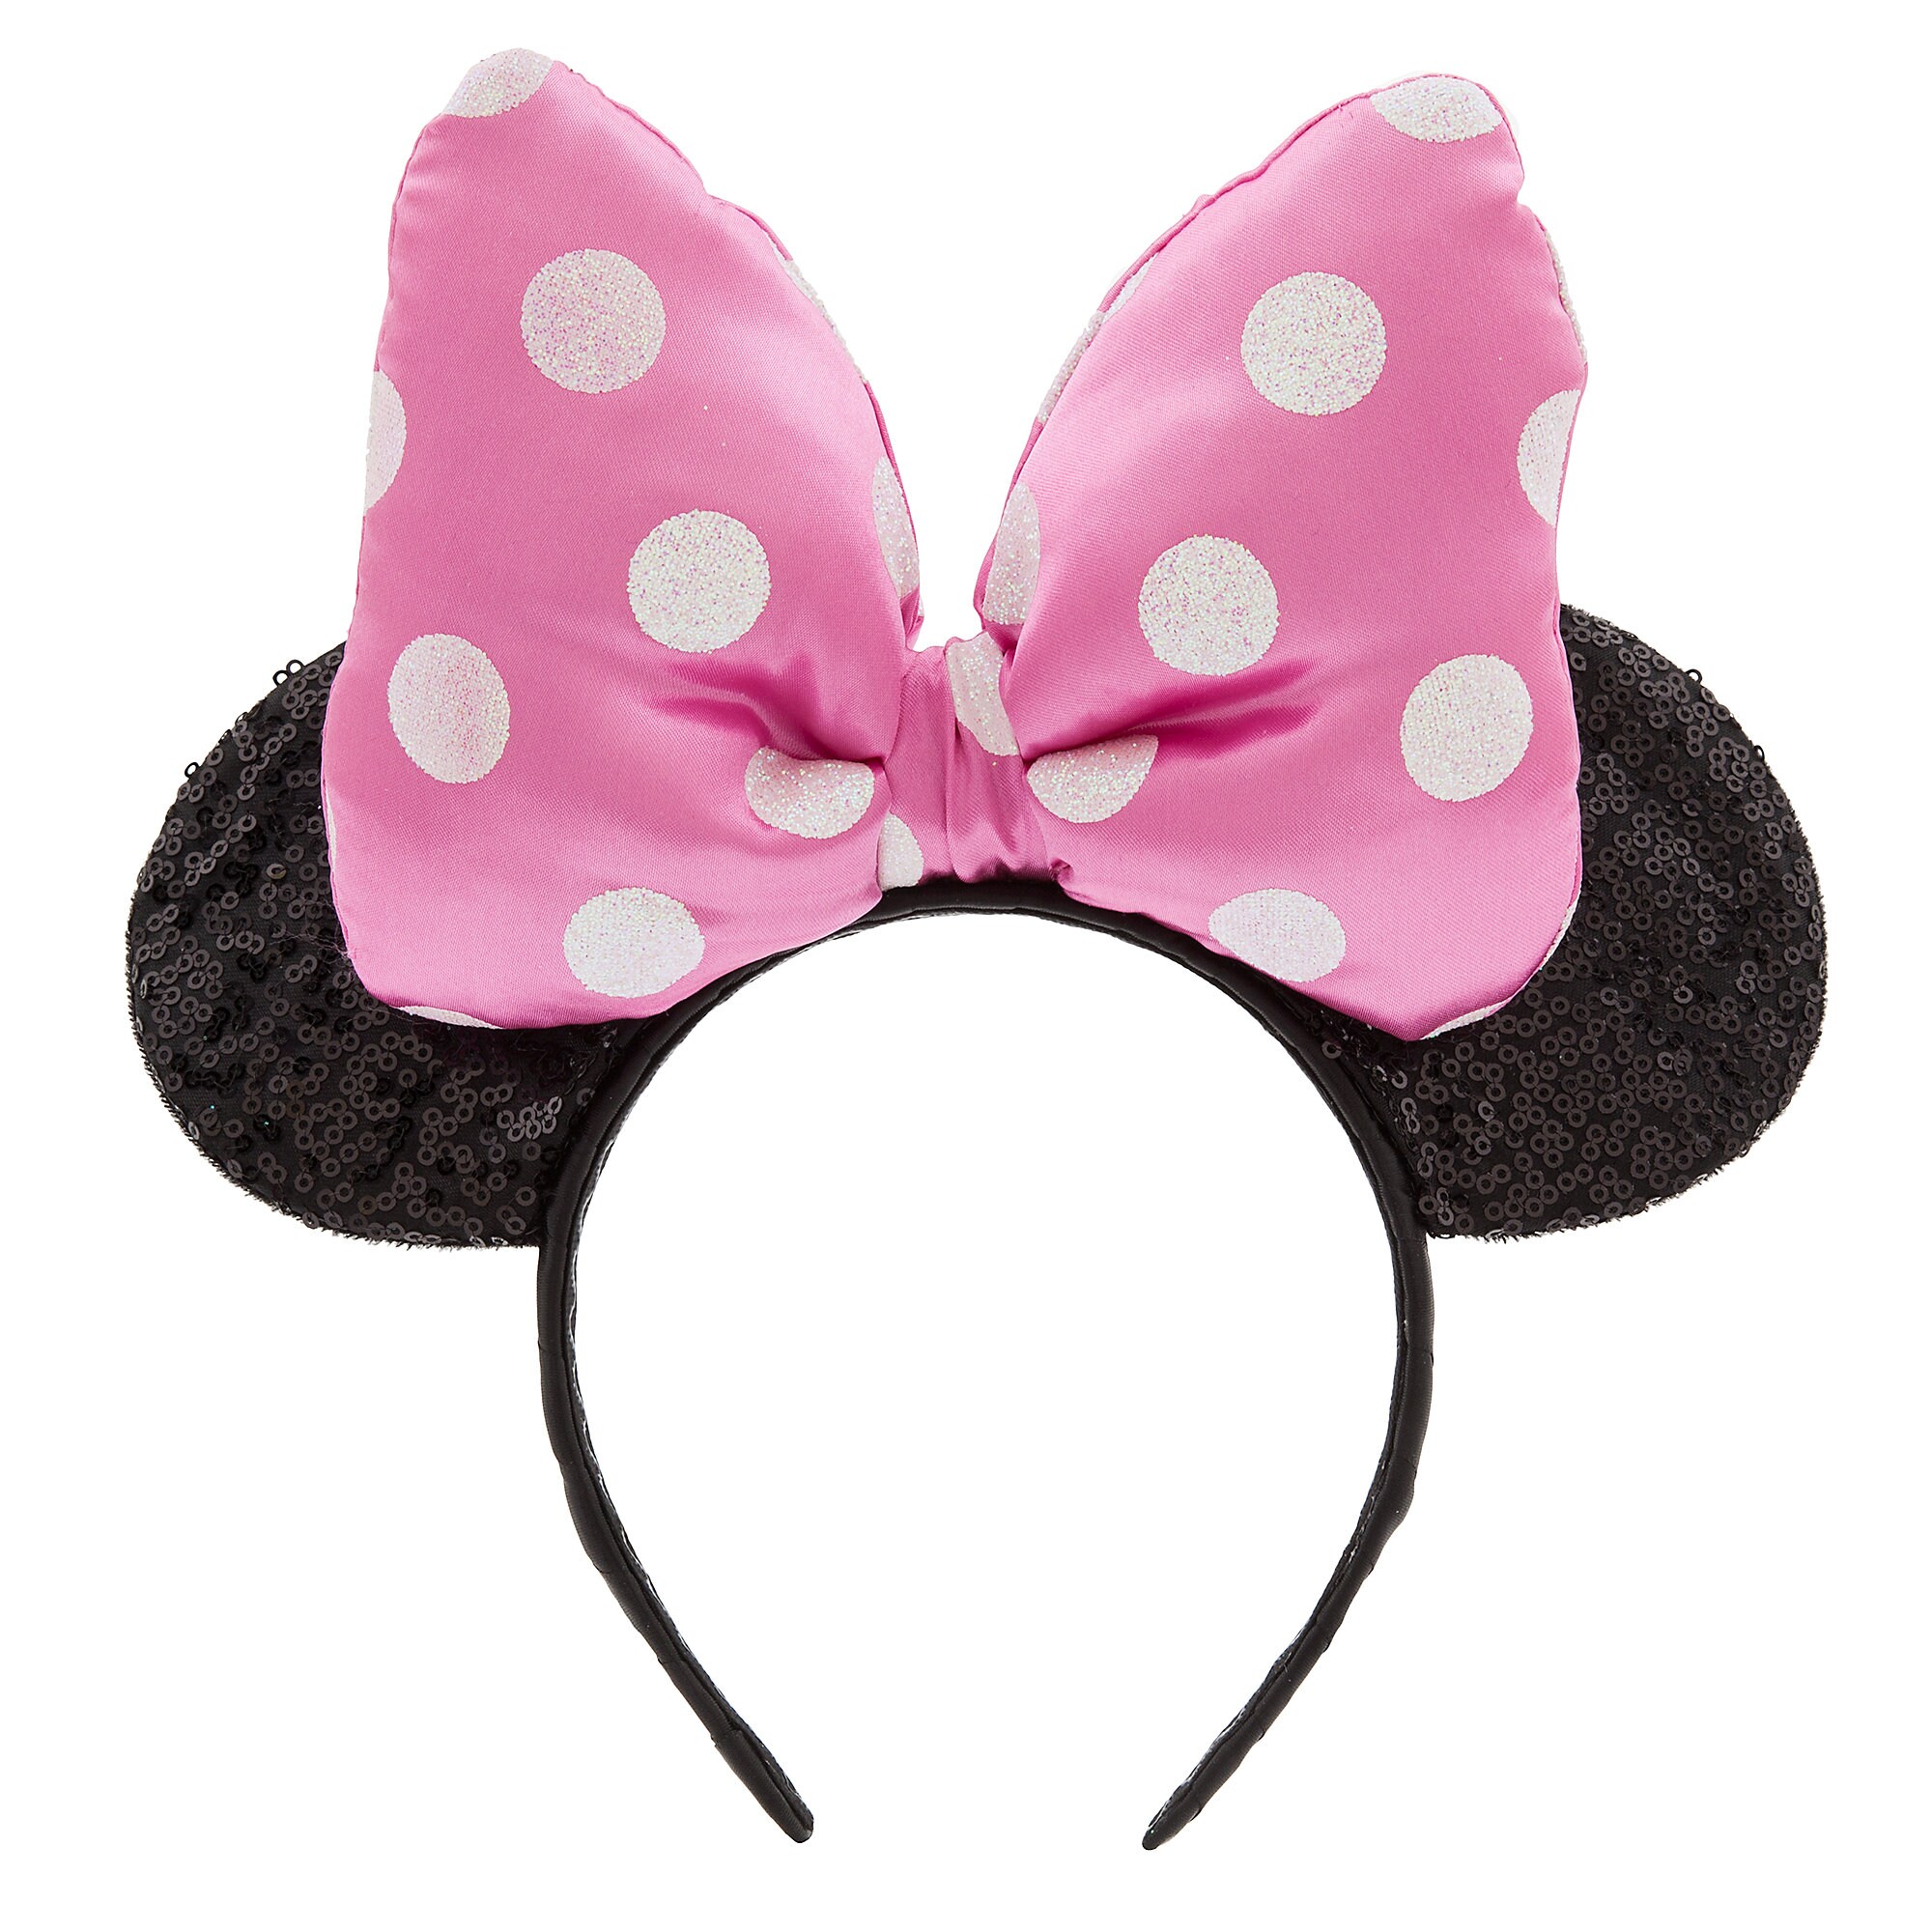 minnie-mouse-ear-headband-for-kids-pink-is-available-online-for